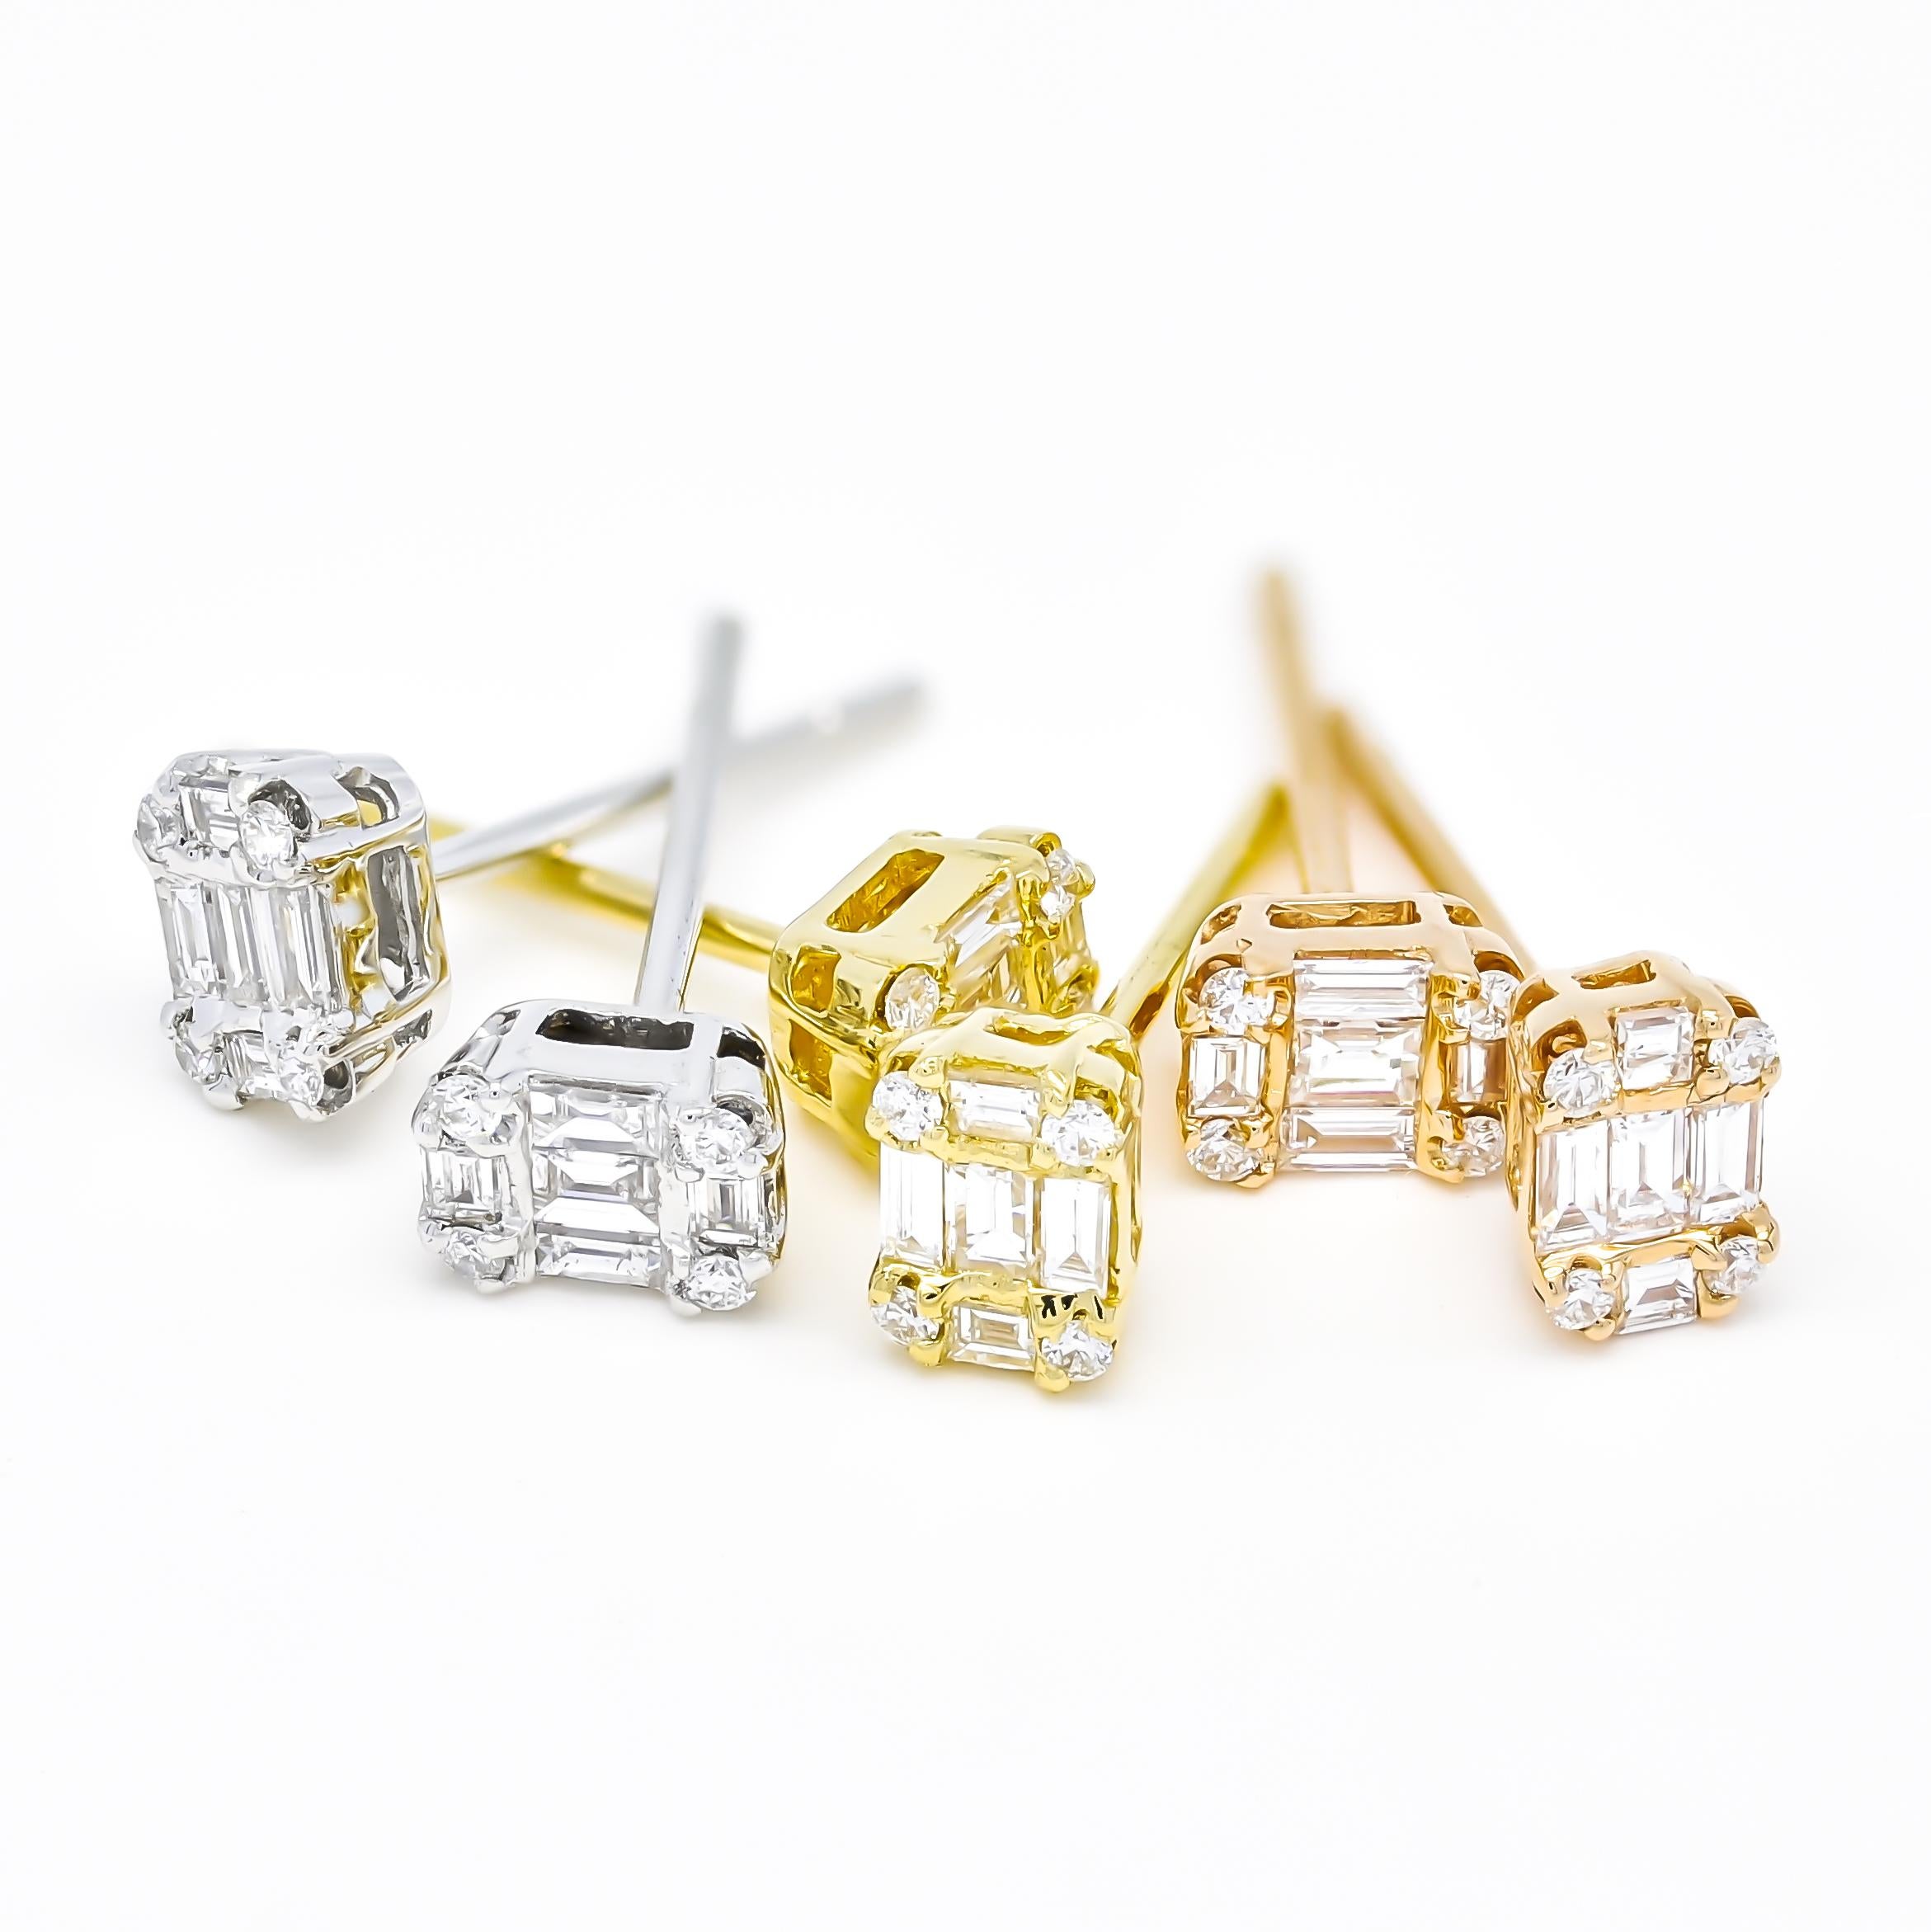 Natural Diamond 0.30 carats 18KT Yellow Gold Modern Stud Earrings For Sale 2